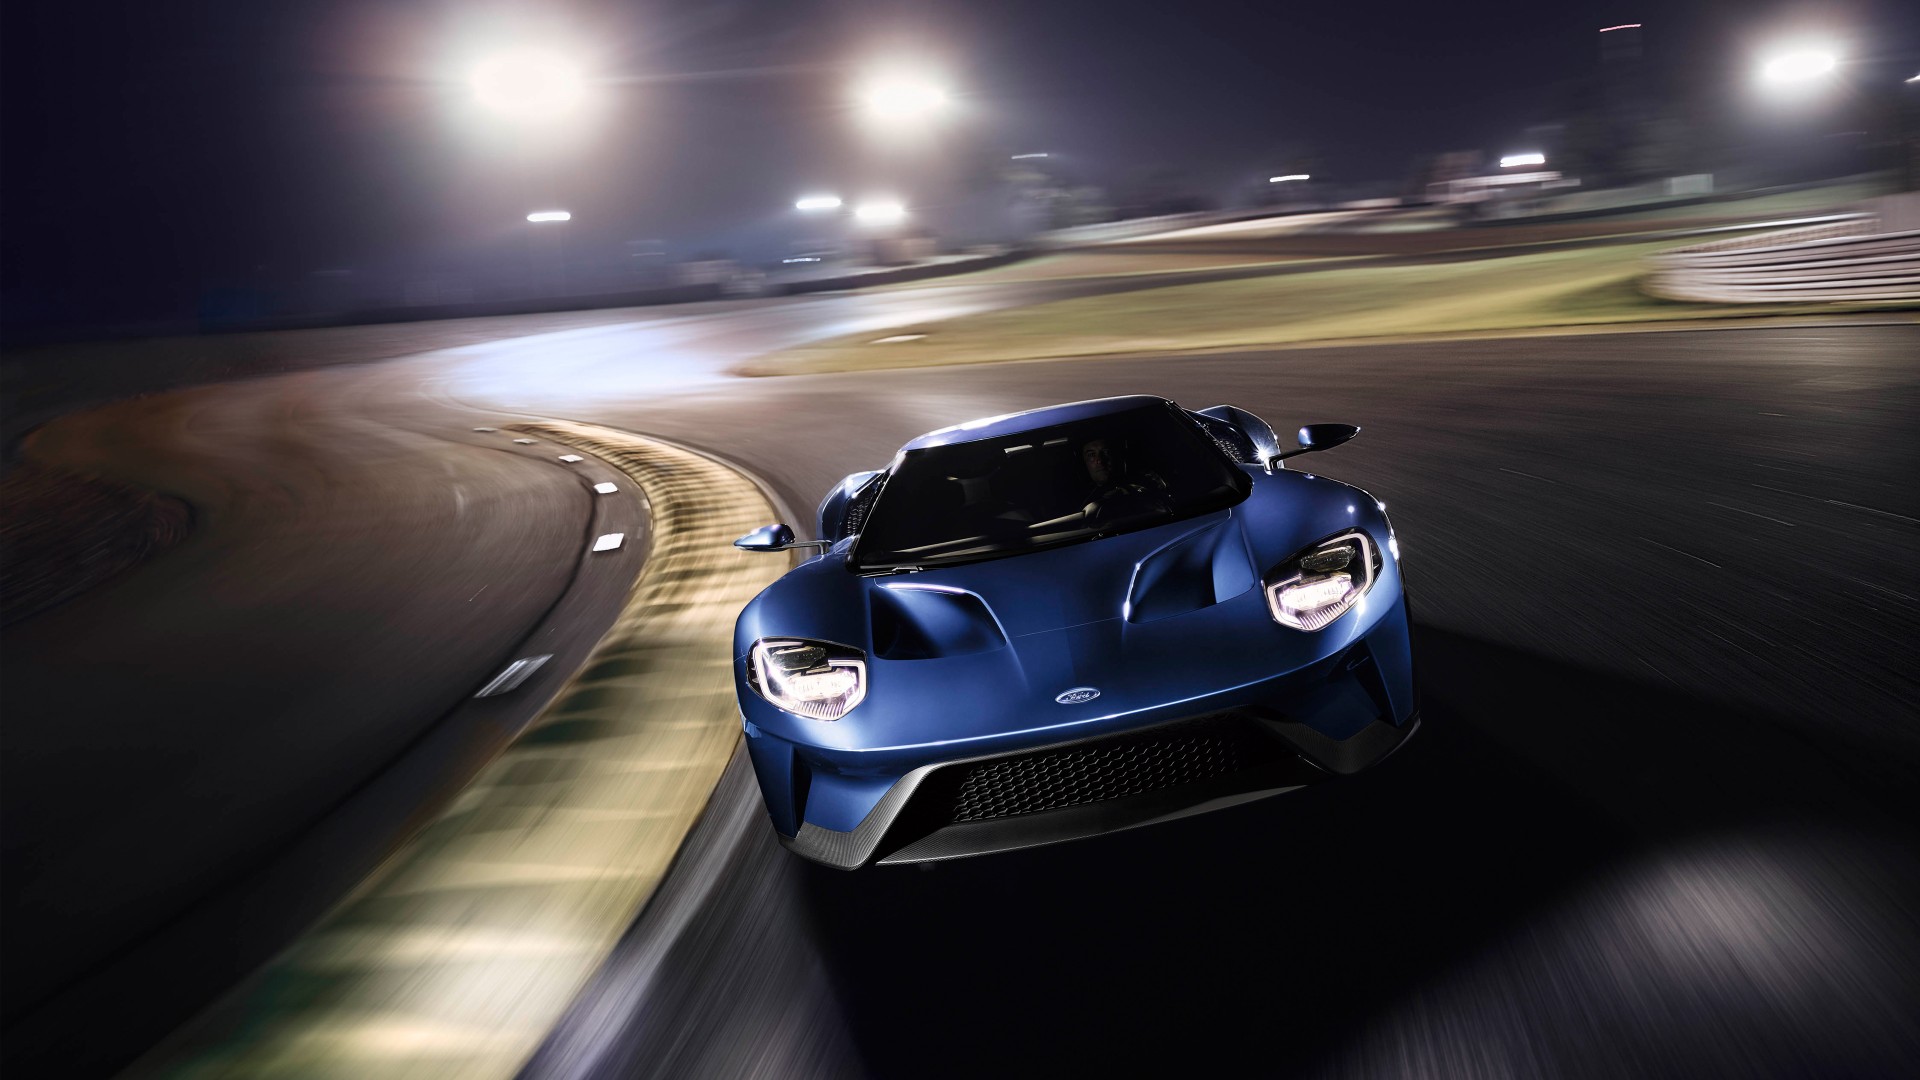 2017 Ford Gt 2 Wallpaper Hd Car Wallpapers | 2017  2018 Best Cars 